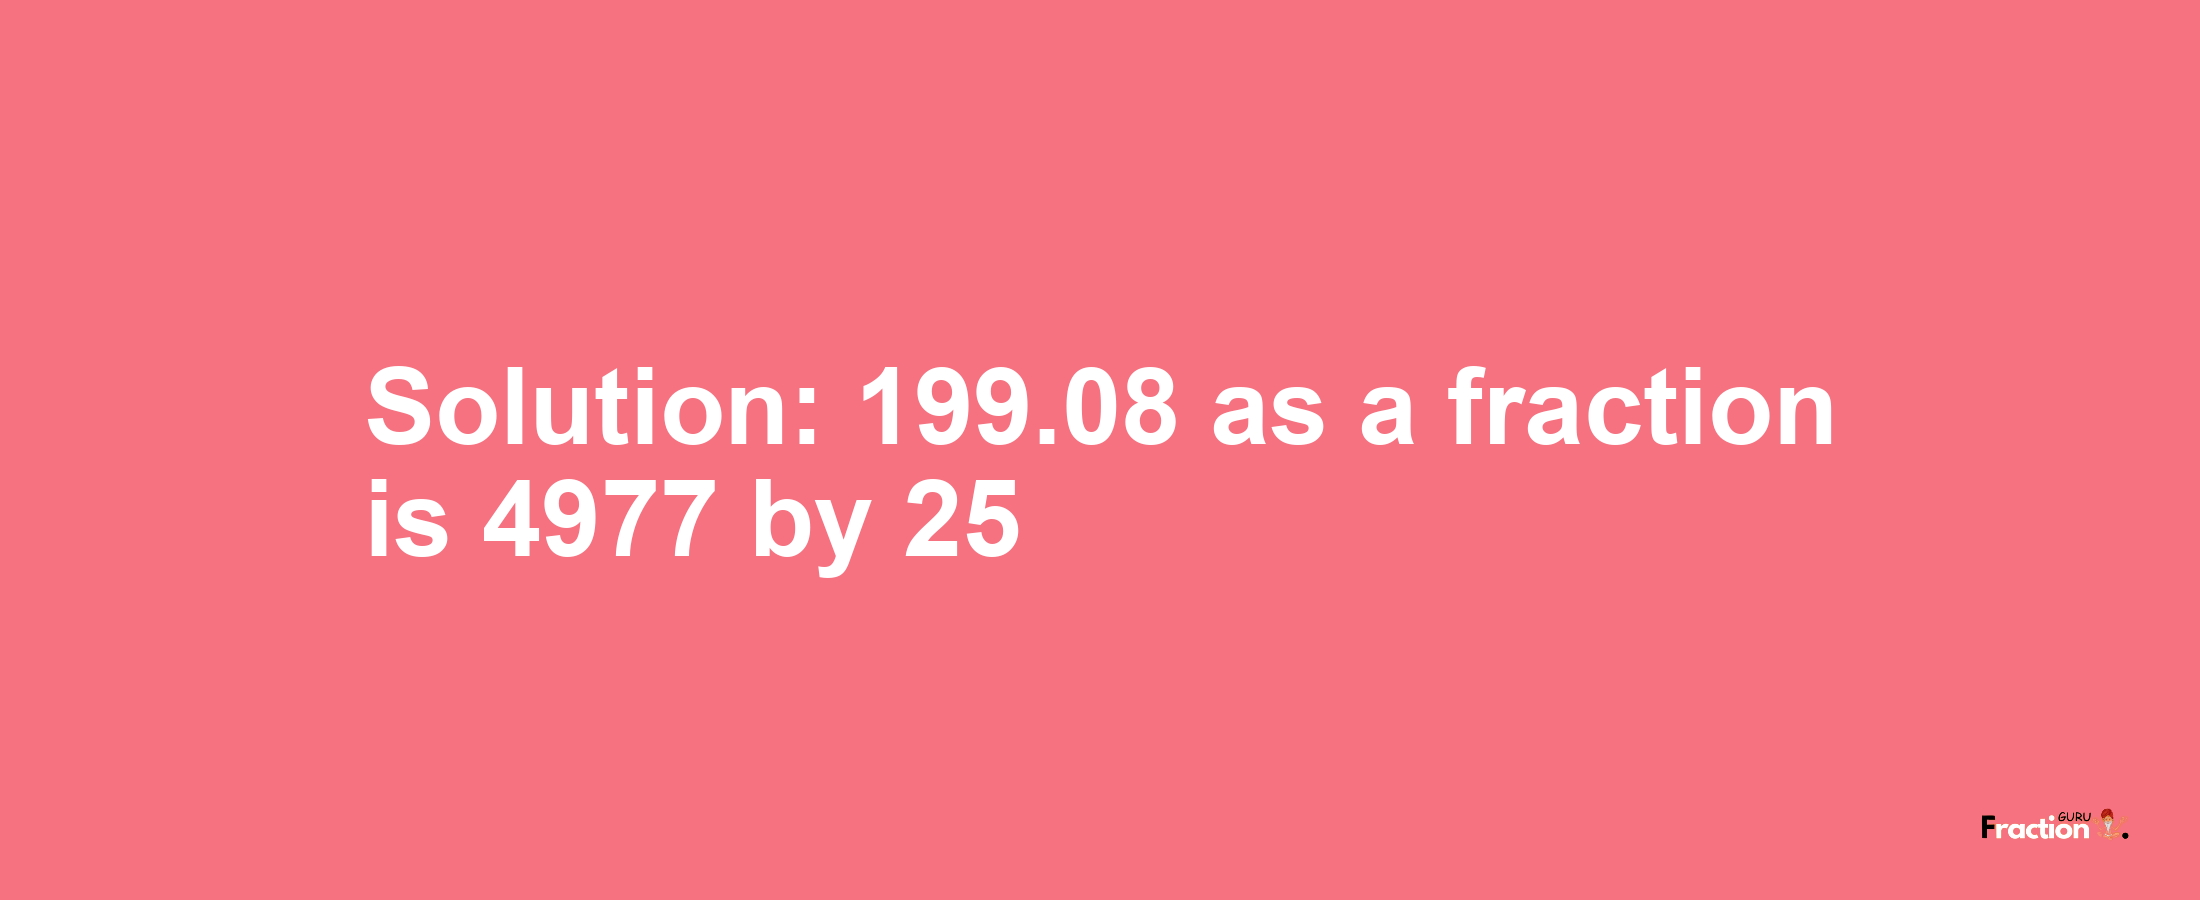 Solution:199.08 as a fraction is 4977/25